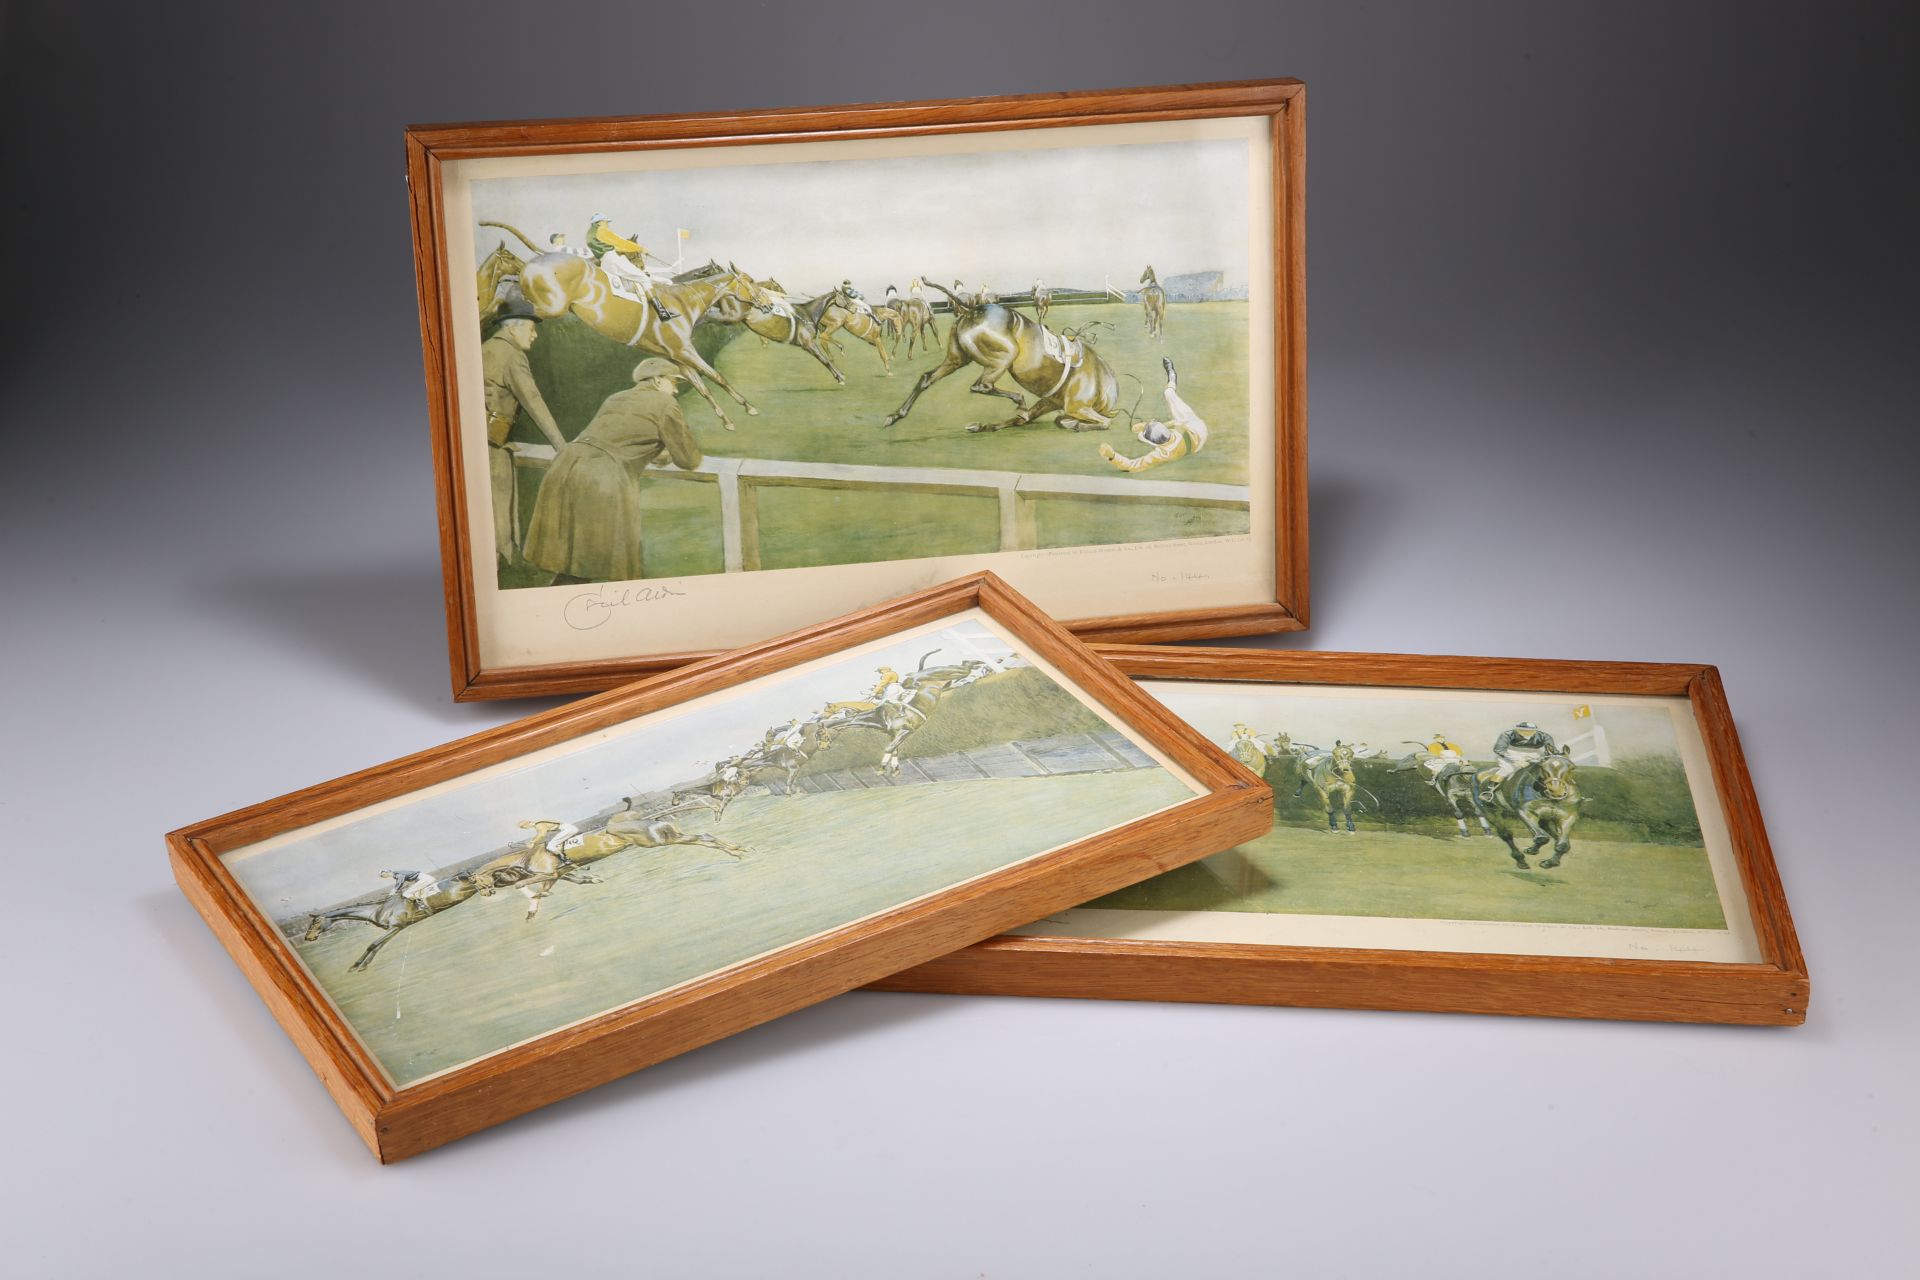 AFTER CECIL ALDIN (1870-1935), THE GRAND NATIONAL SERIES